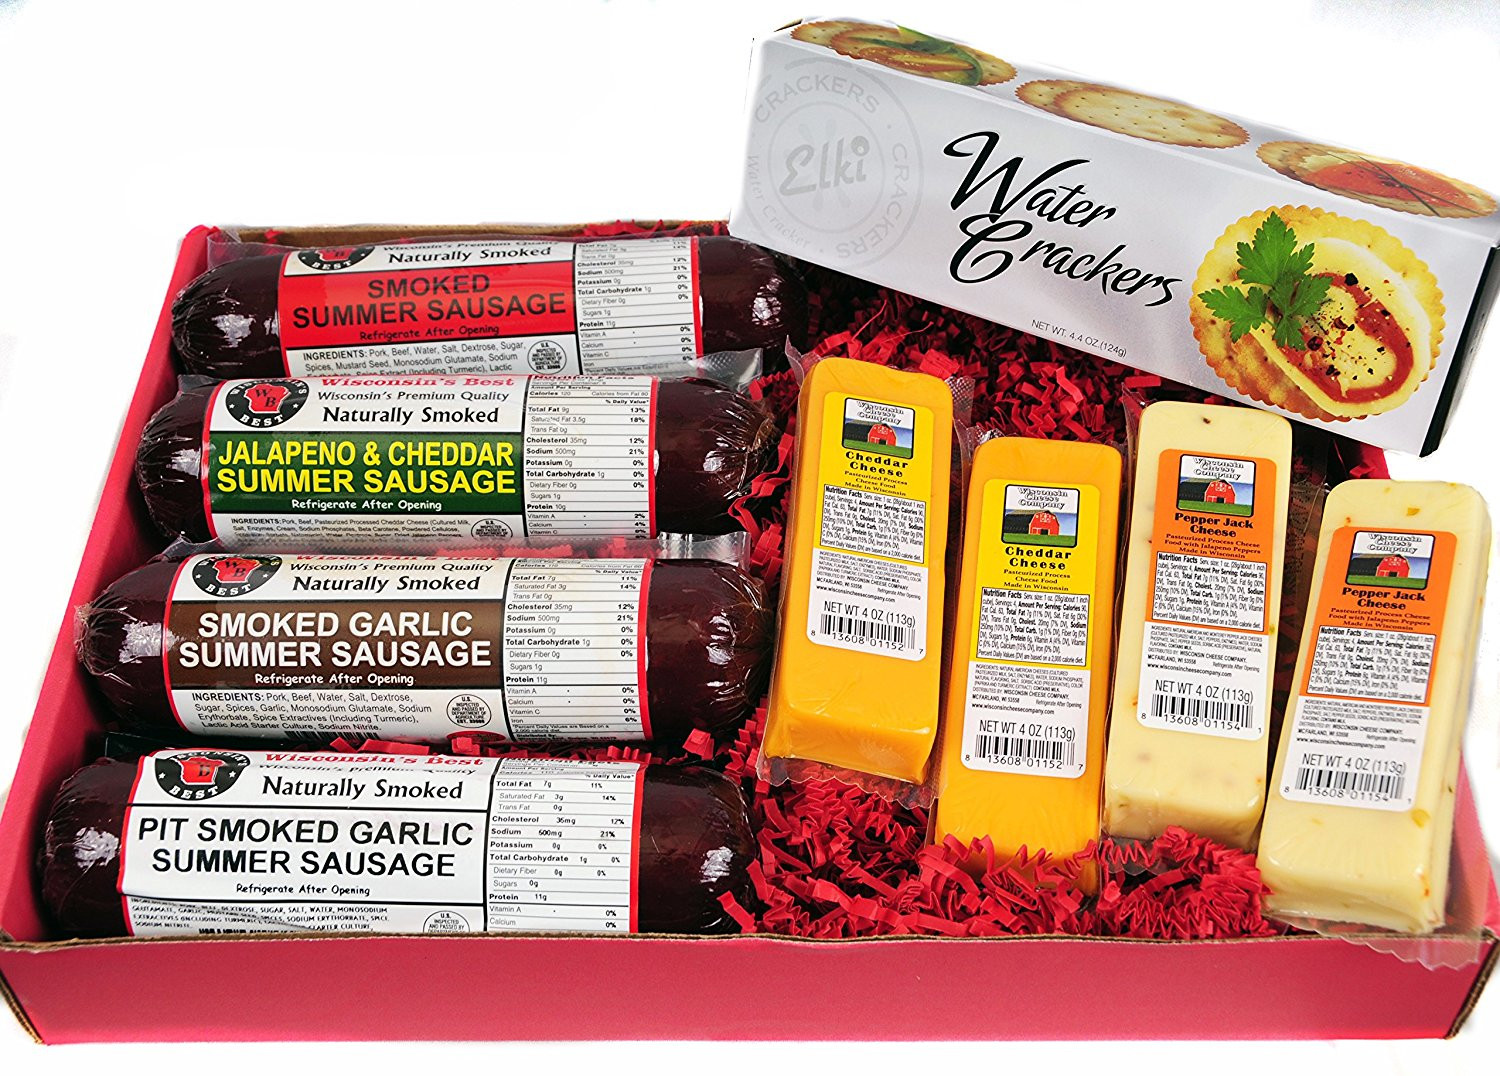 Gourmet Food Gifts
 Gourmet Food Gift Baskets Best Cheeses Sausages Meat